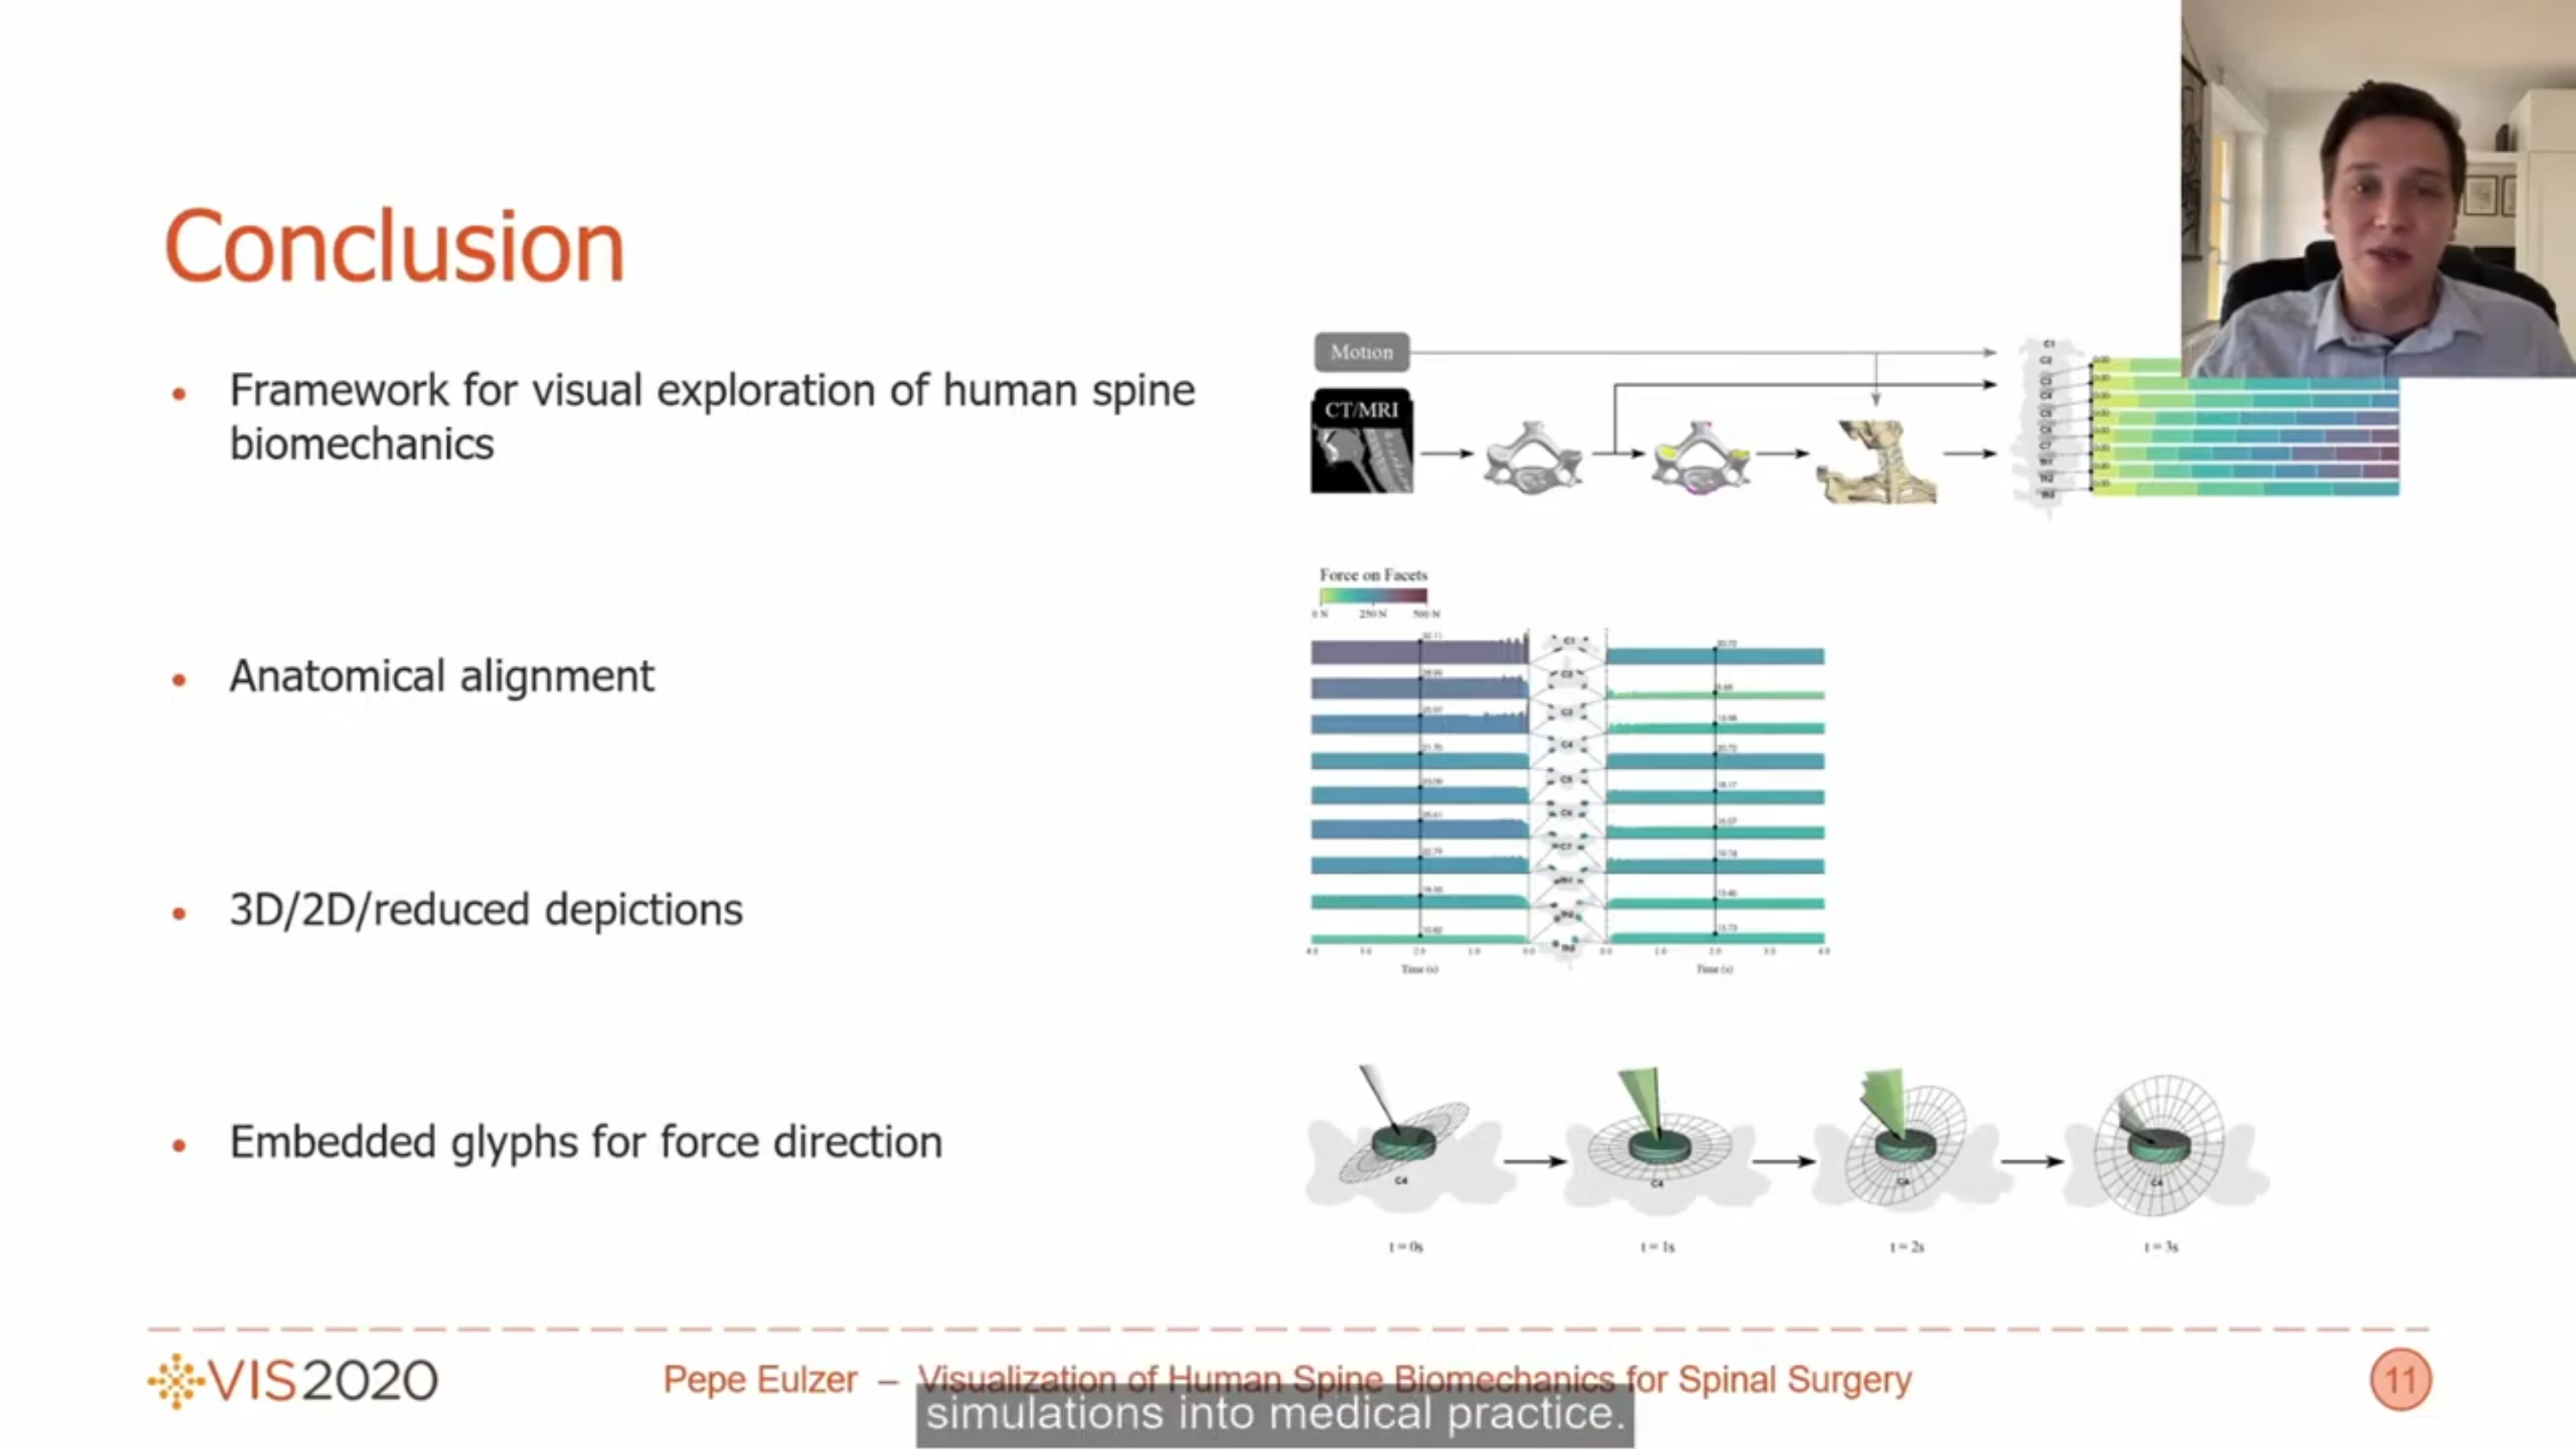 Visualization of Human Spine Biomechanics for Spinal Surgery